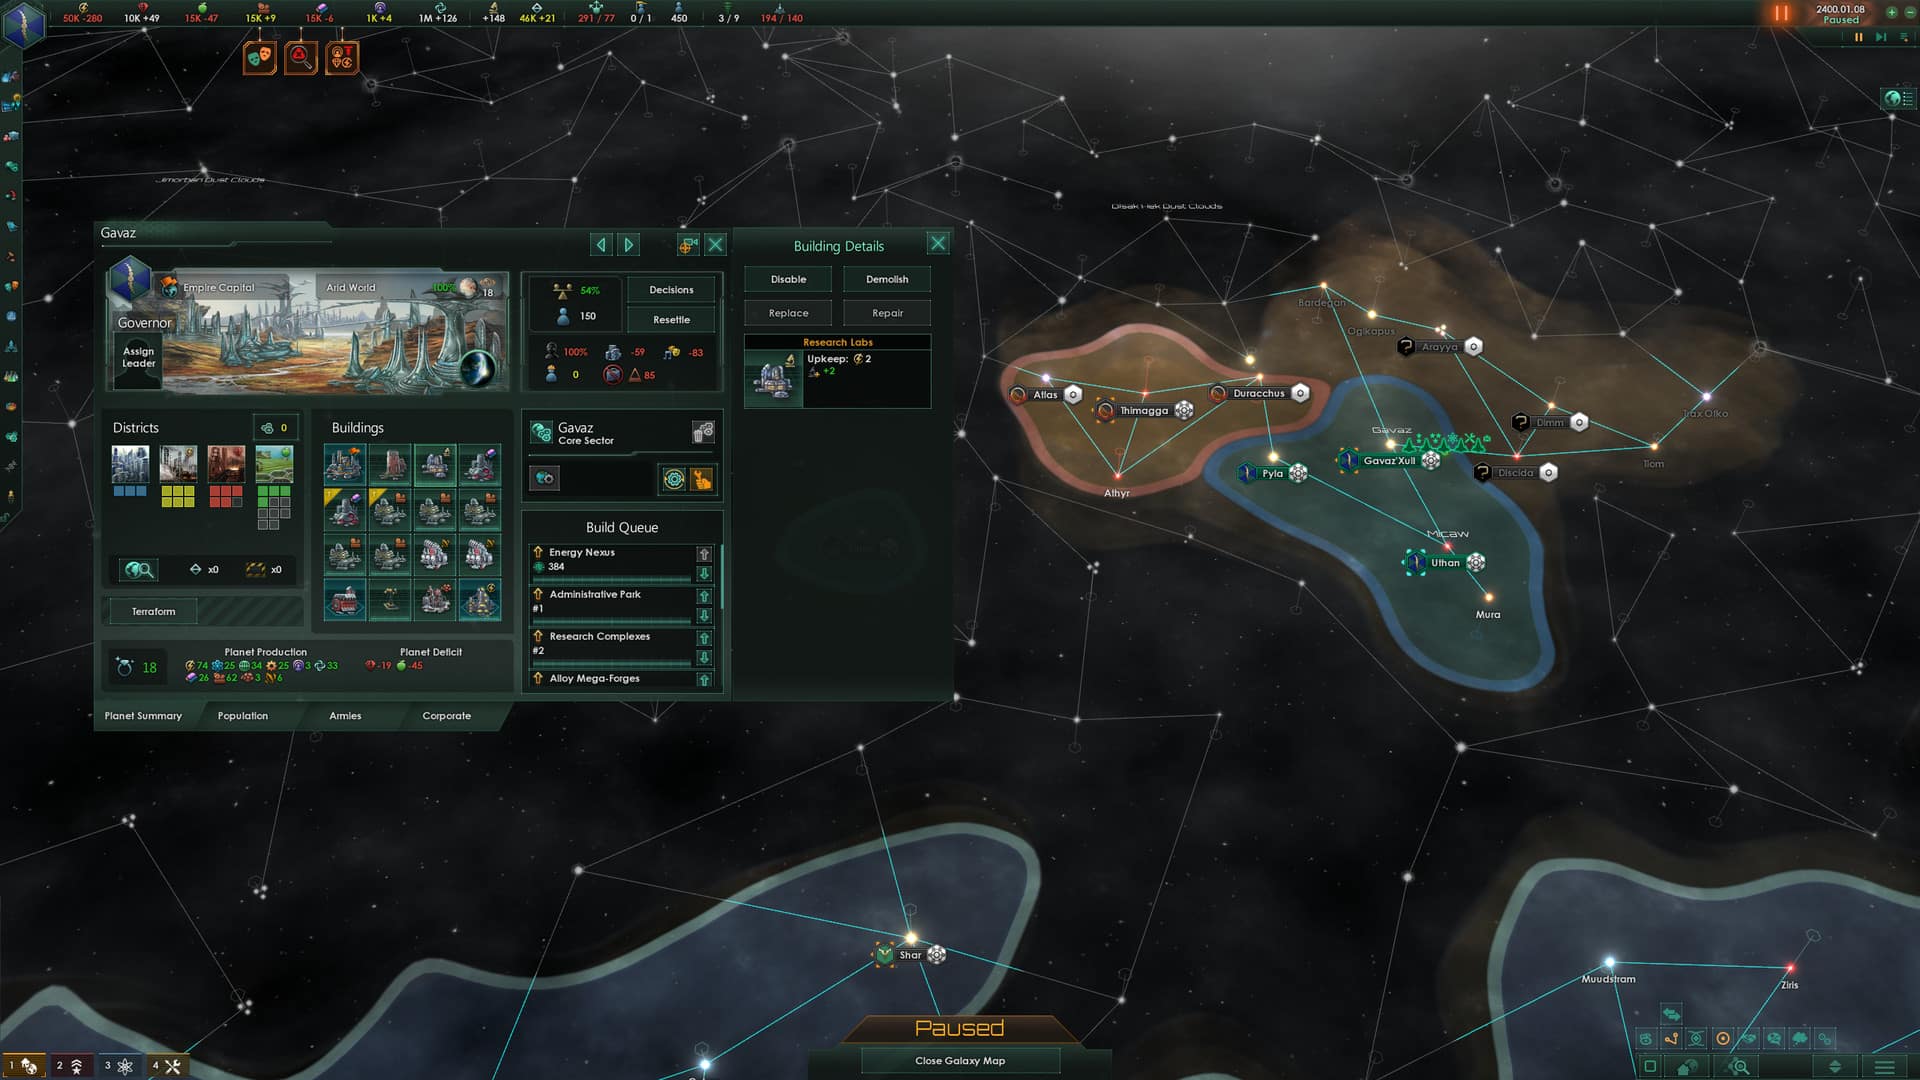 An image of gameplay from Stellaris with cheat codes